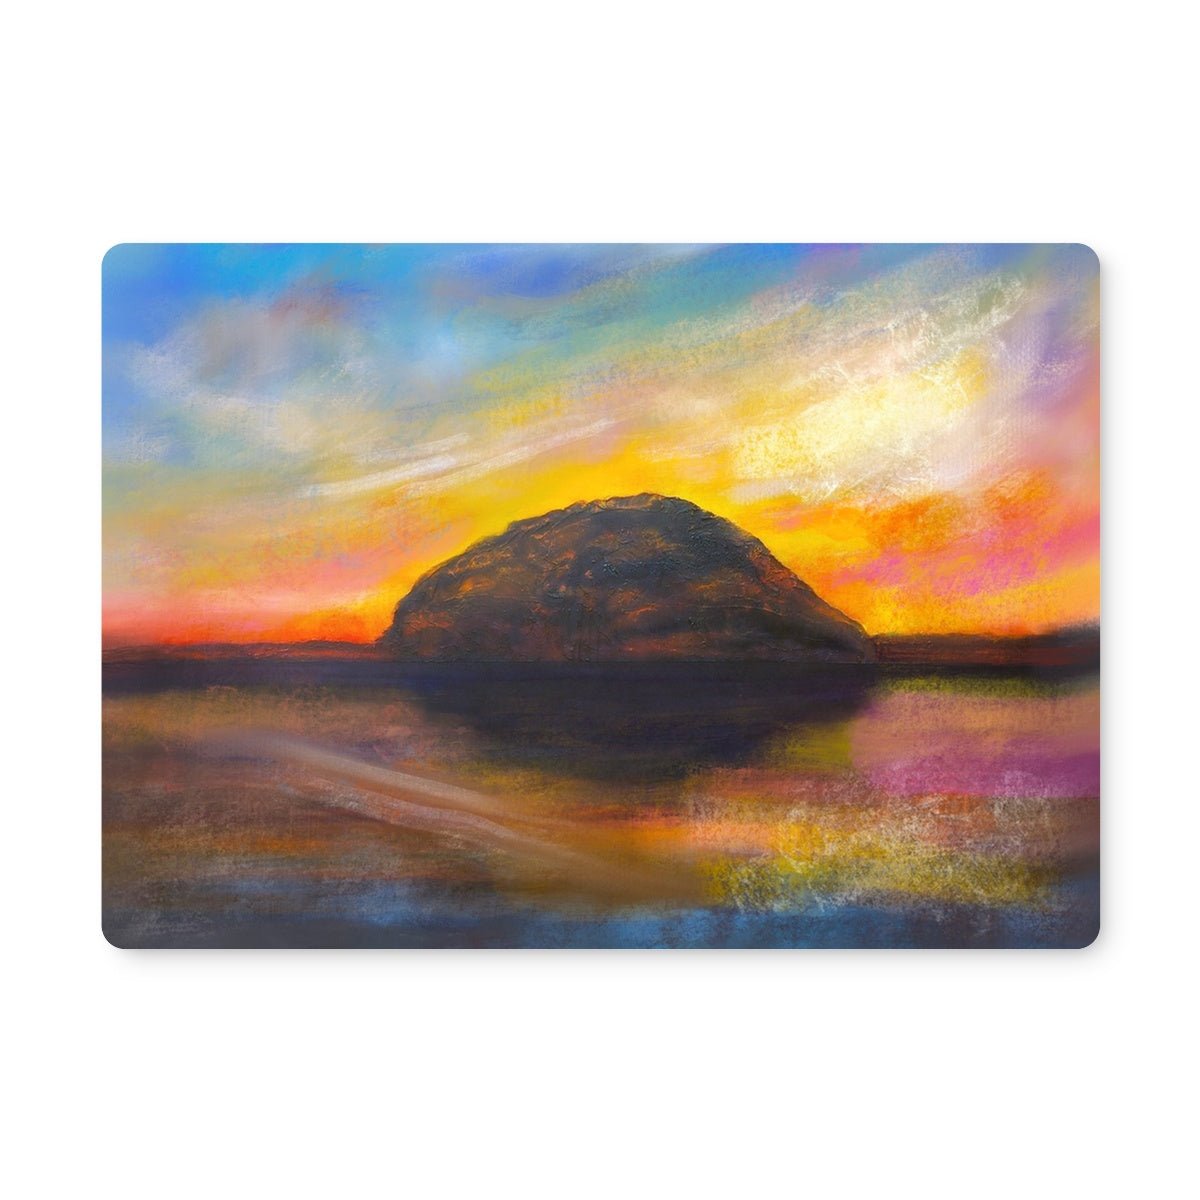 Ailsa Craig Dusk Arran Art Gifts Placemat-Placemats-Arran Art Gallery-Single Placemat-Paintings, Prints, Homeware, Art Gifts From Scotland By Scottish Artist Kevin Hunter